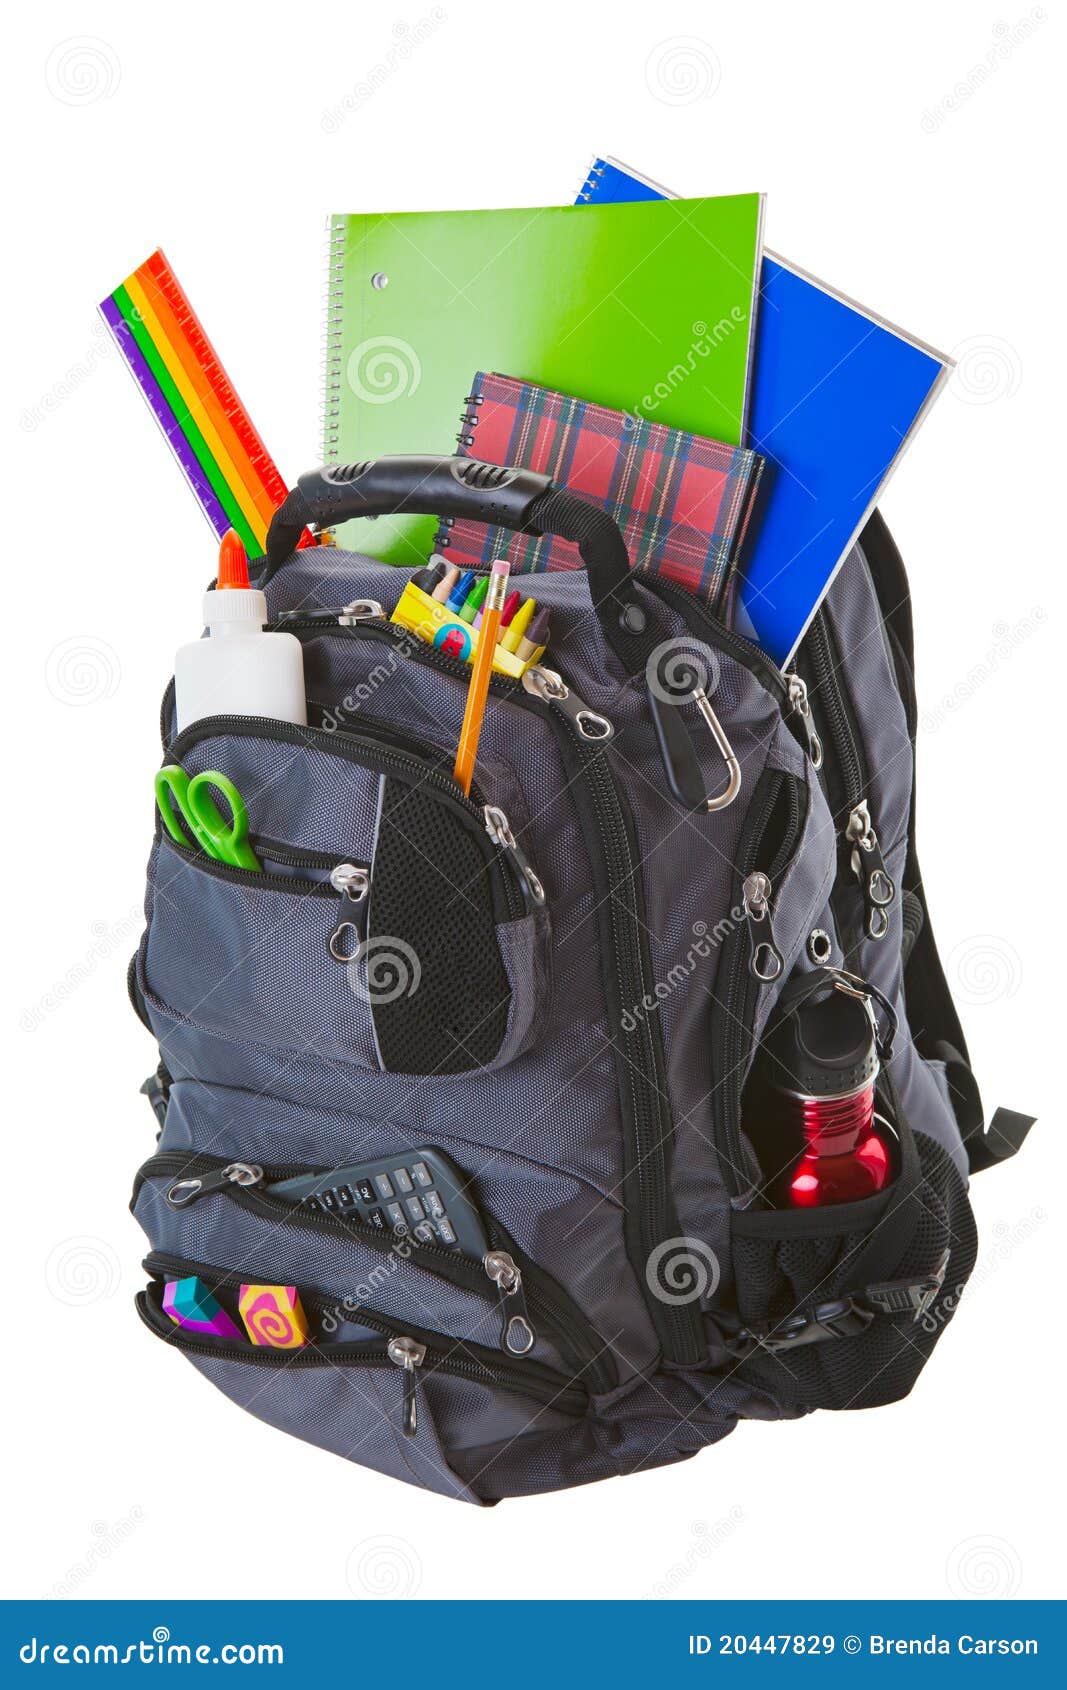 More similar stock images of ` Backpack With School Supplies `